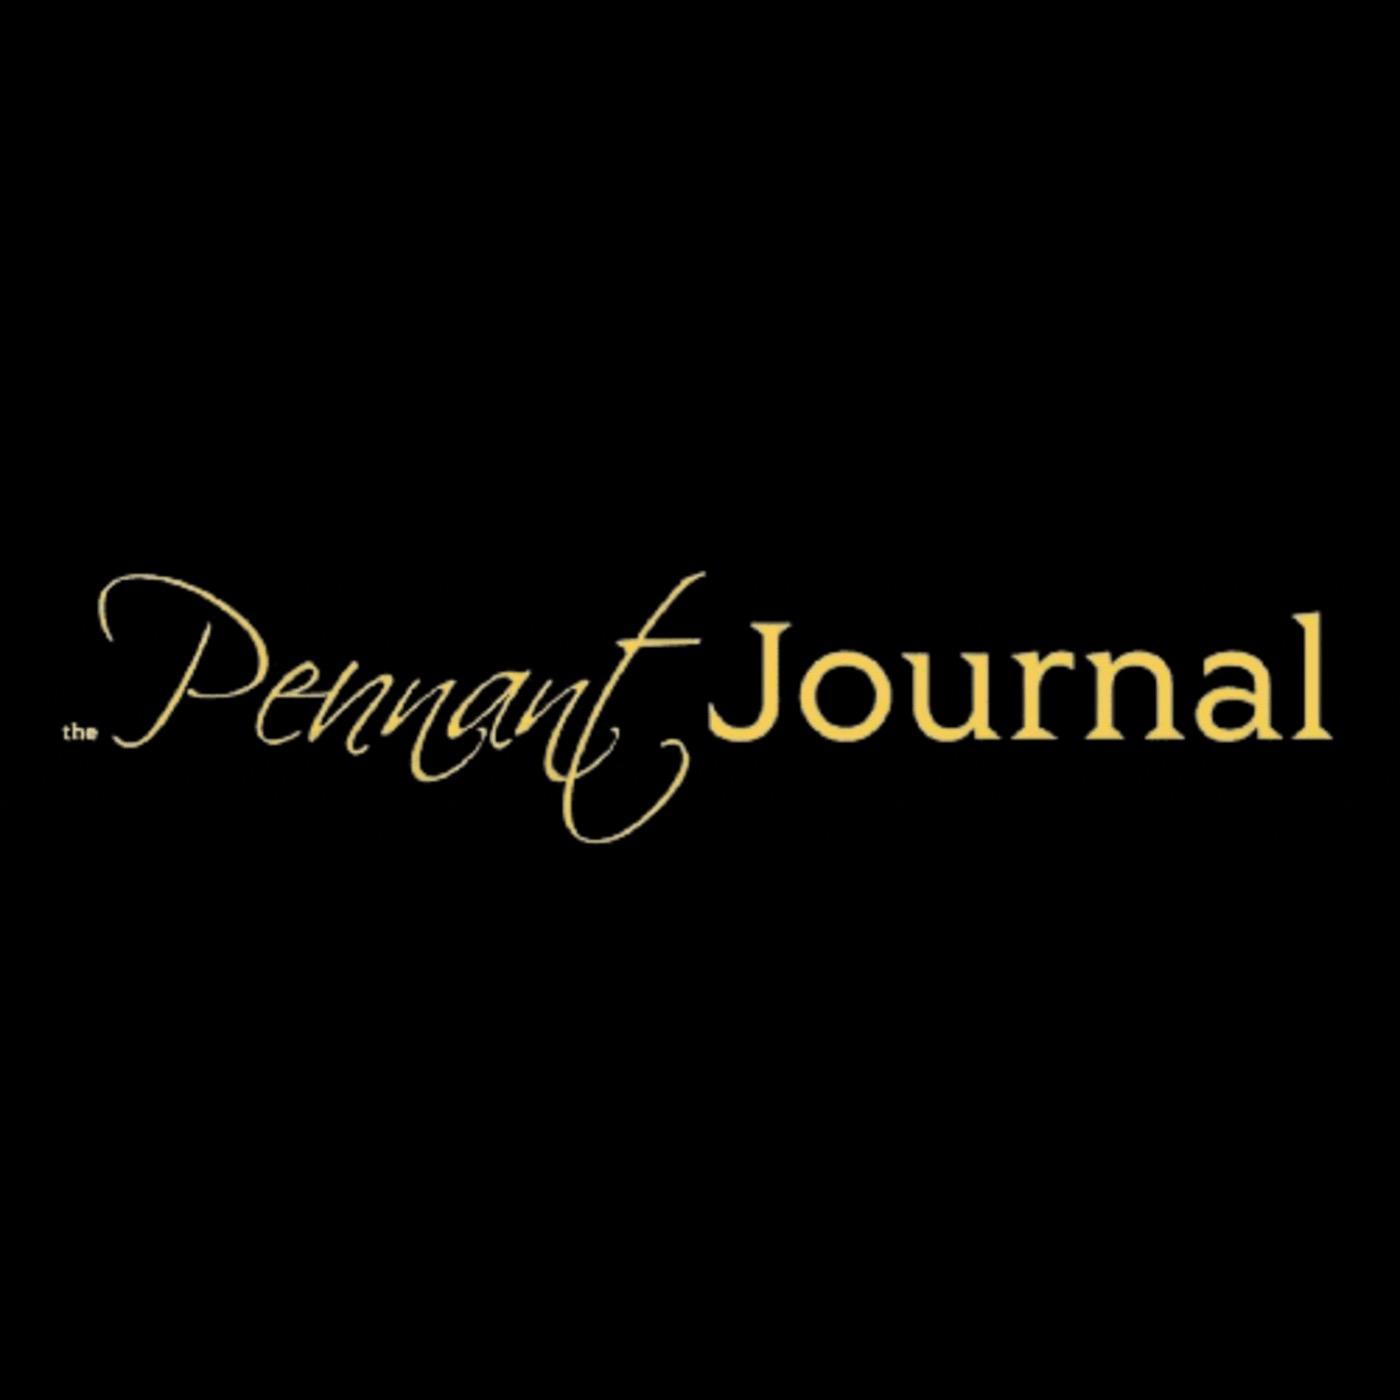 The Pennant Journal Image